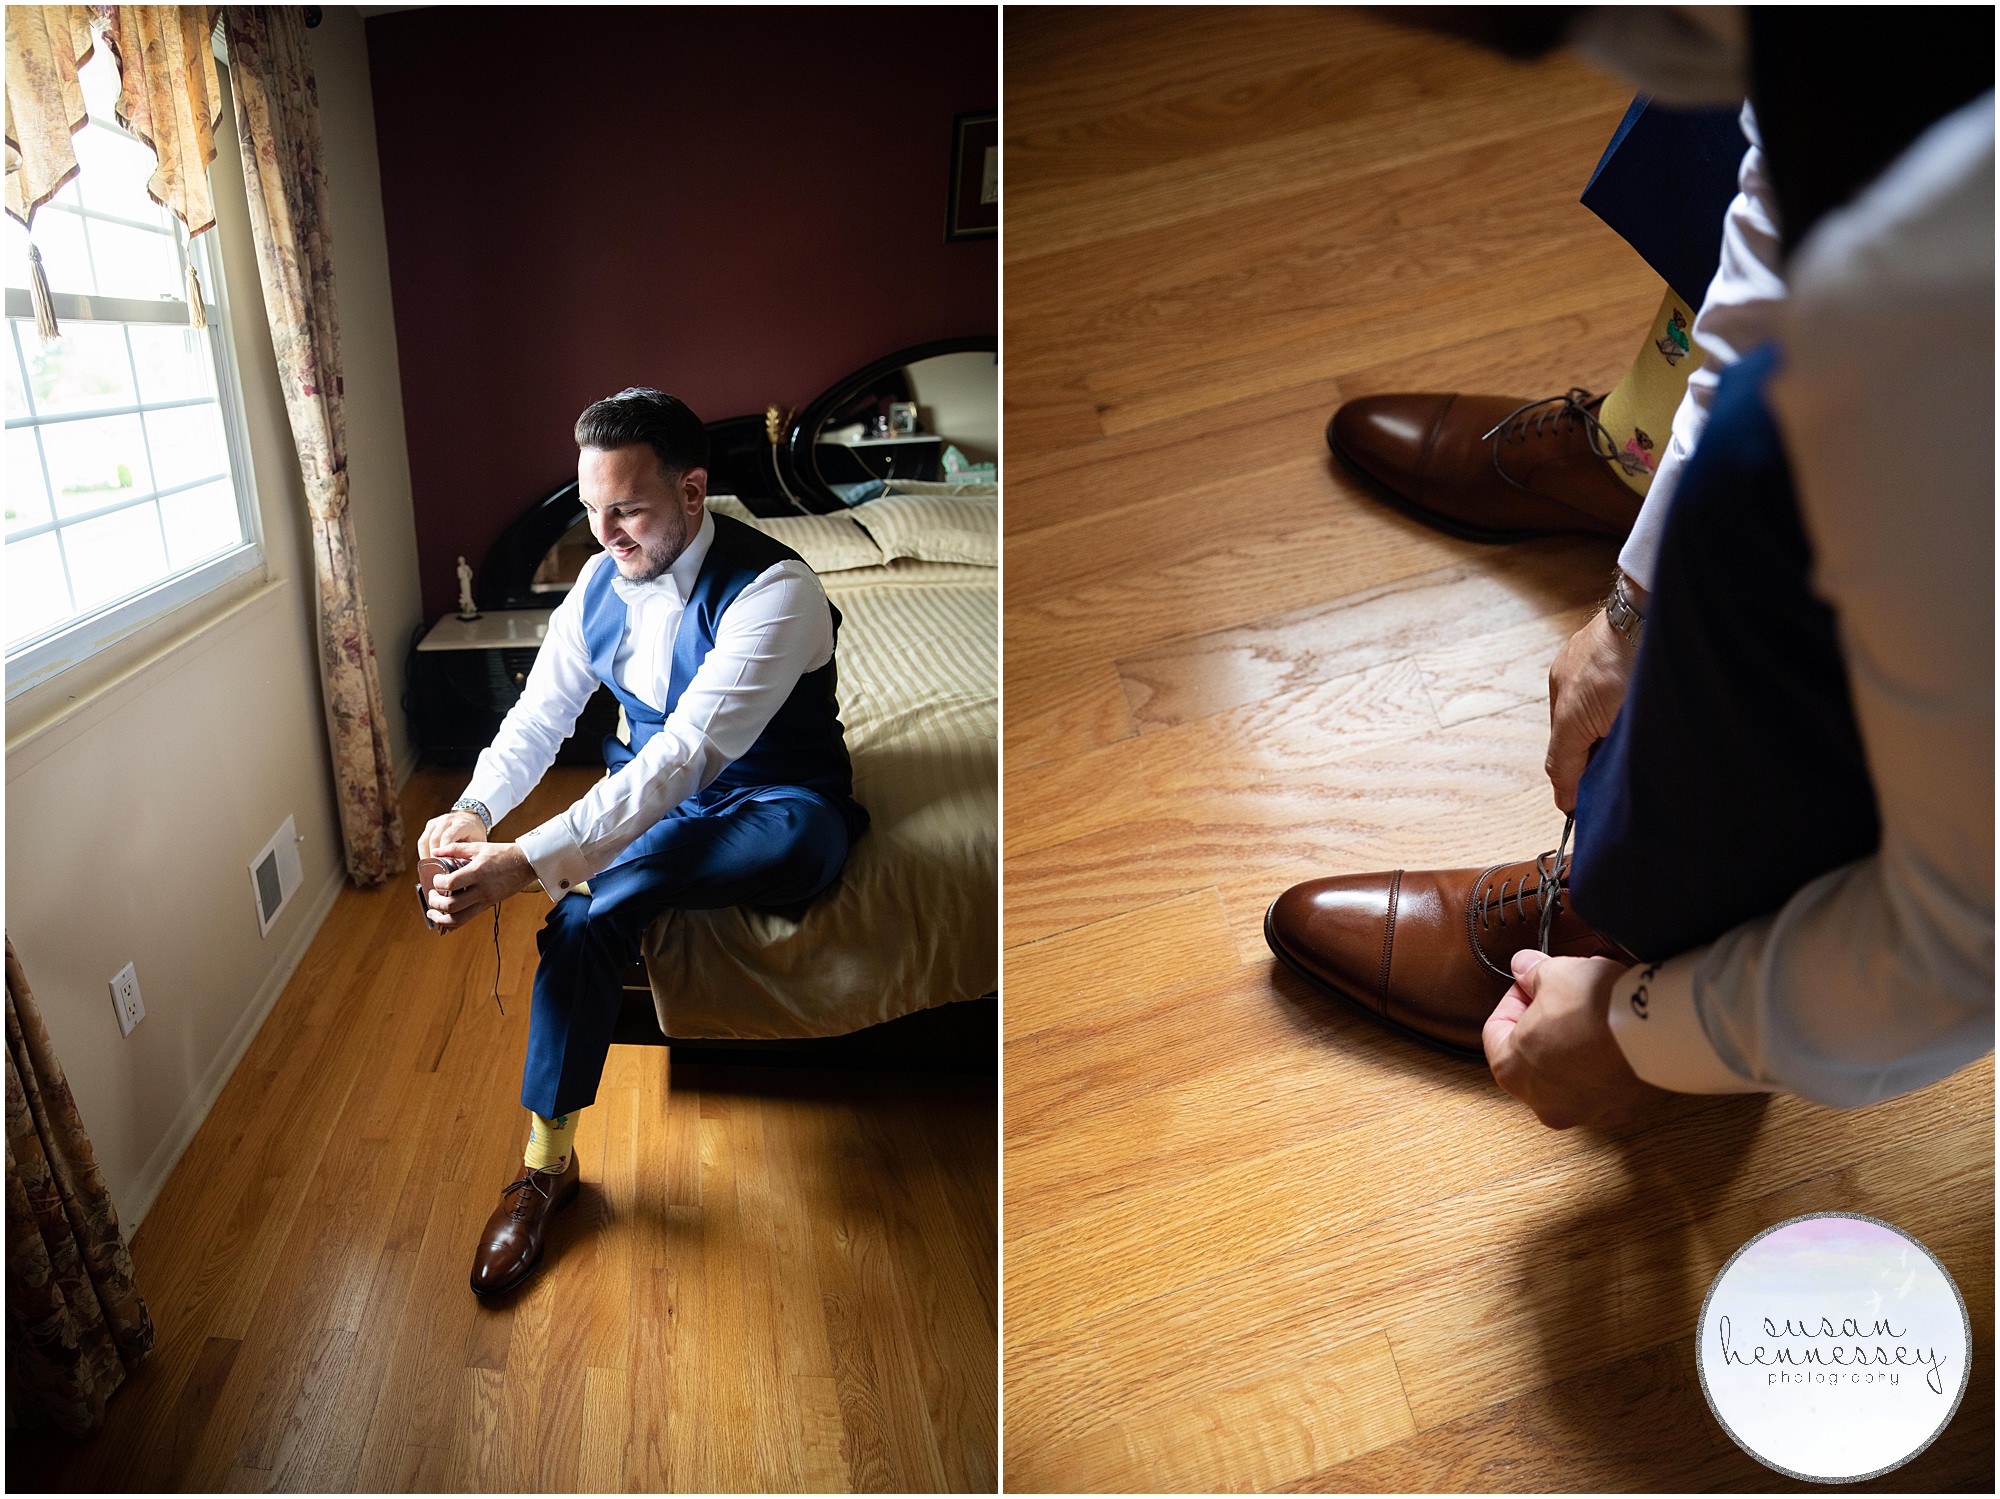 Groom puts on his wedding shoes.